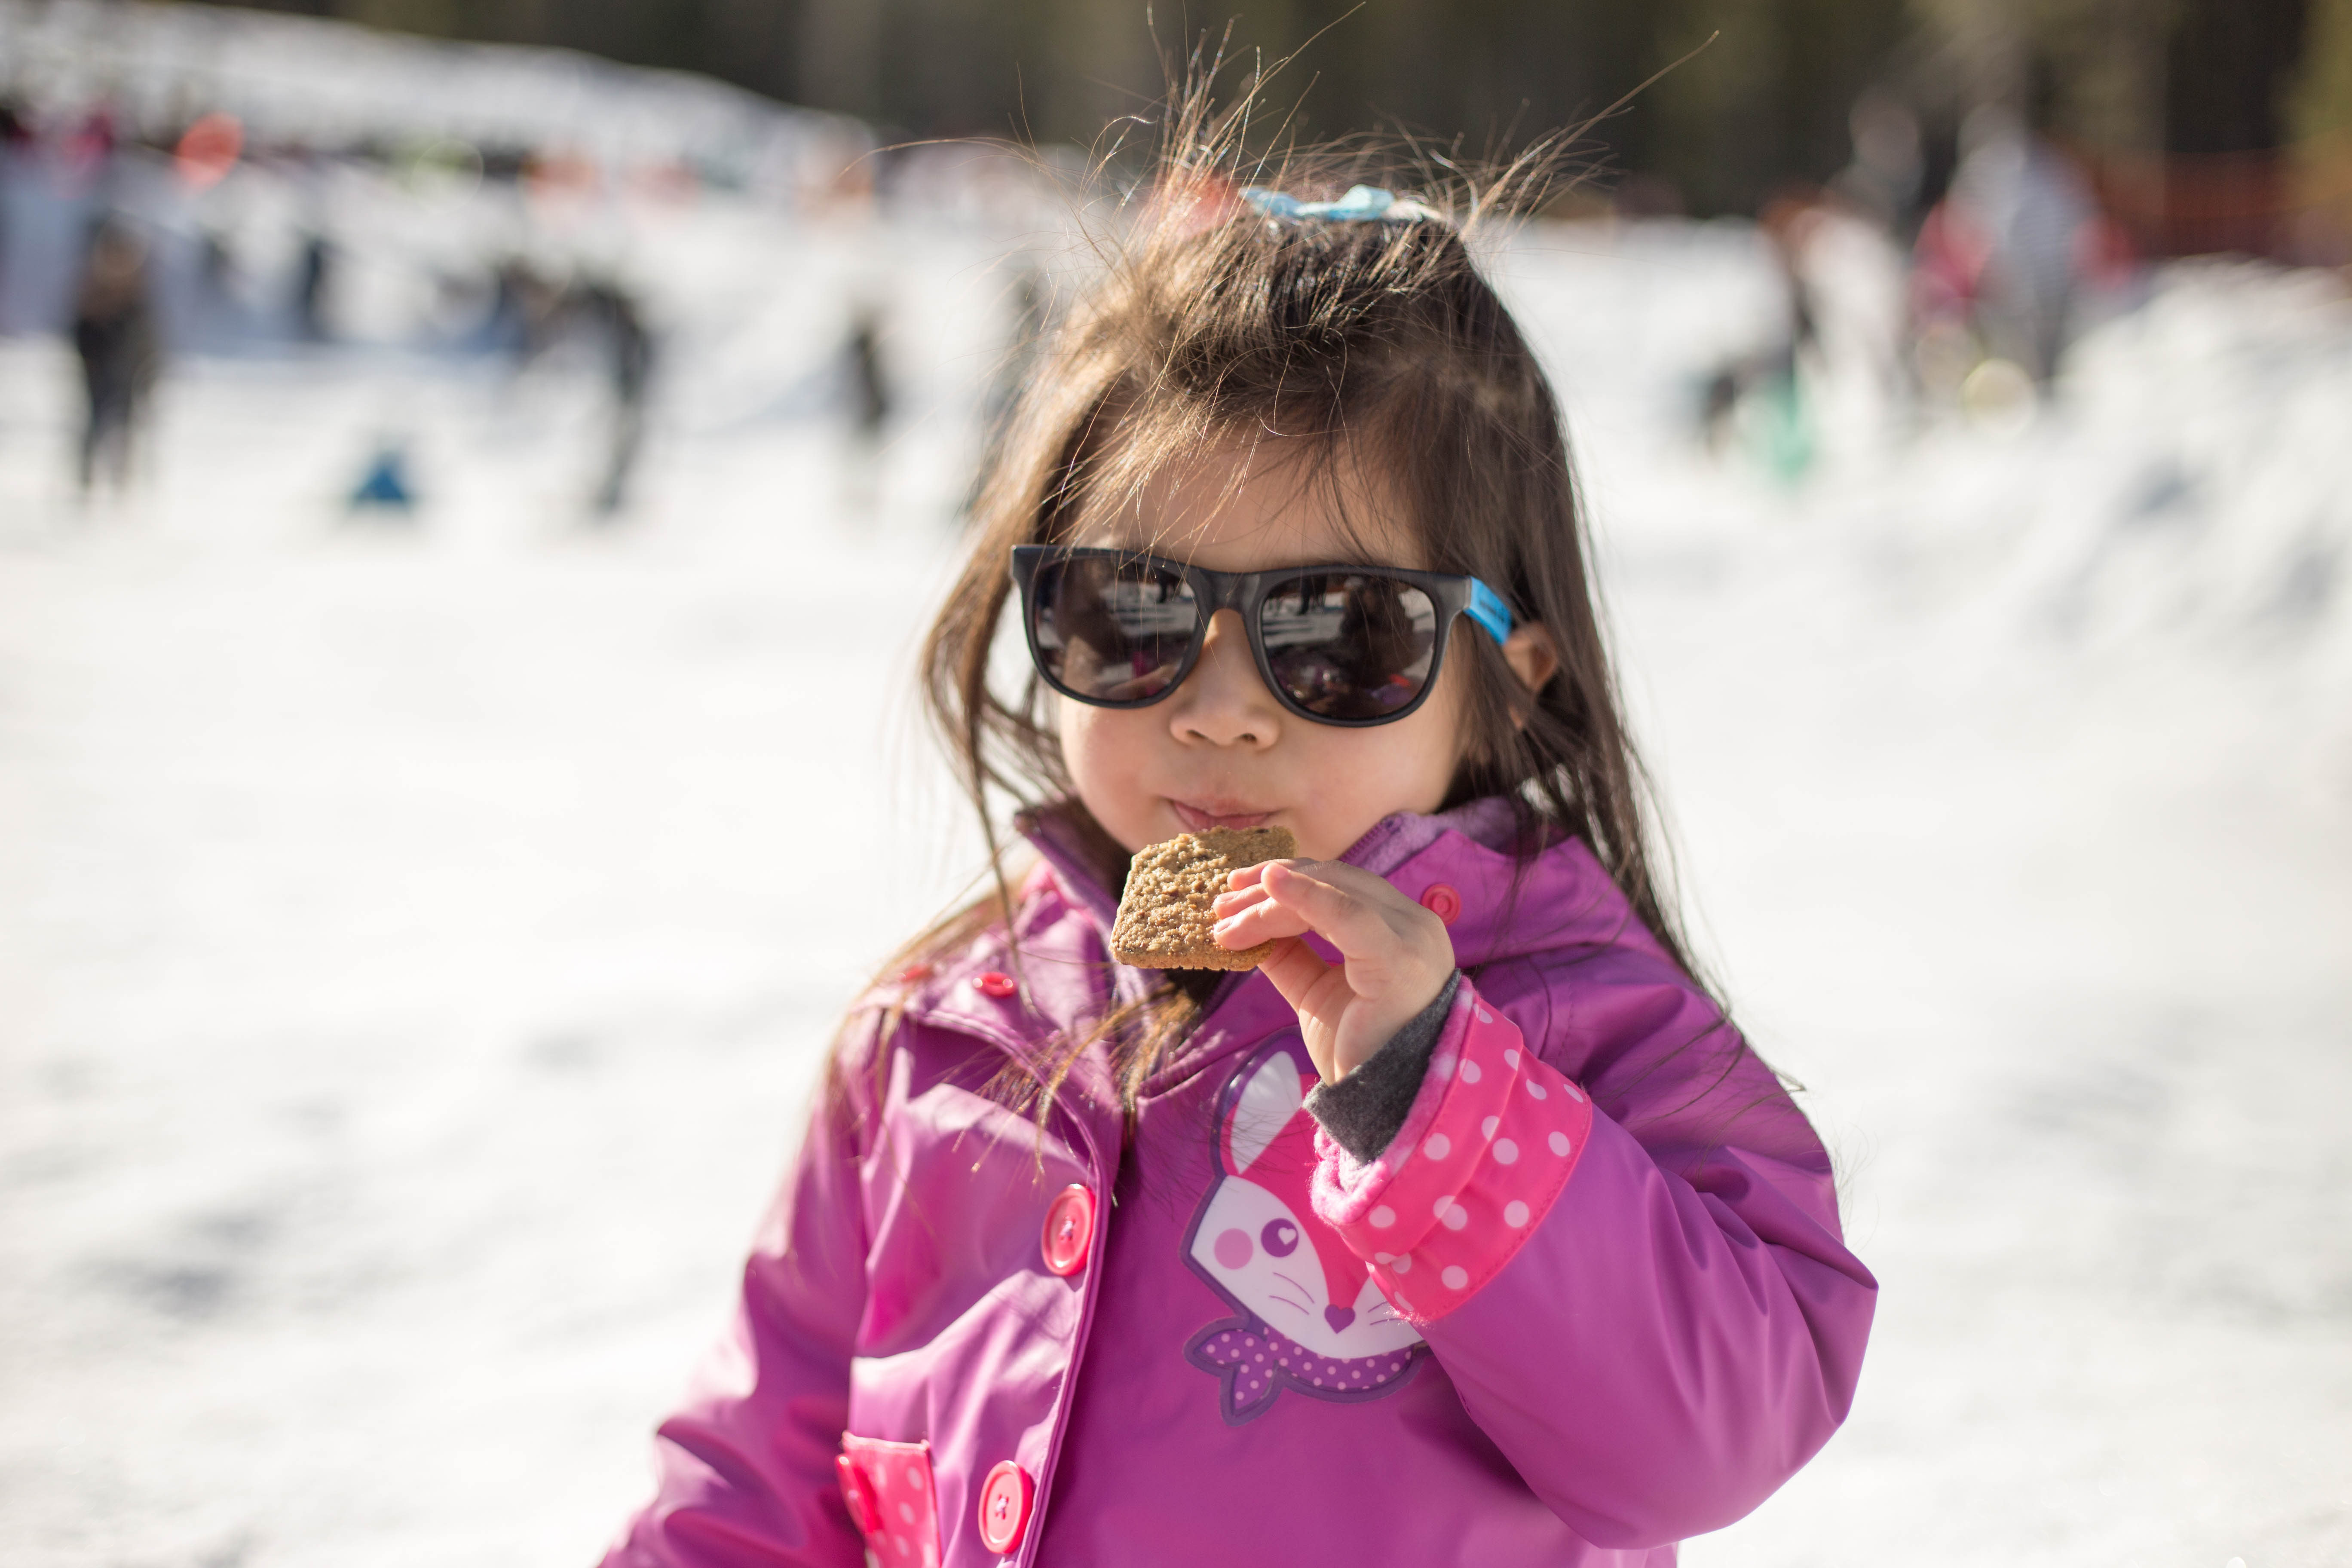 Lookin' good while eating snacks in the snow.